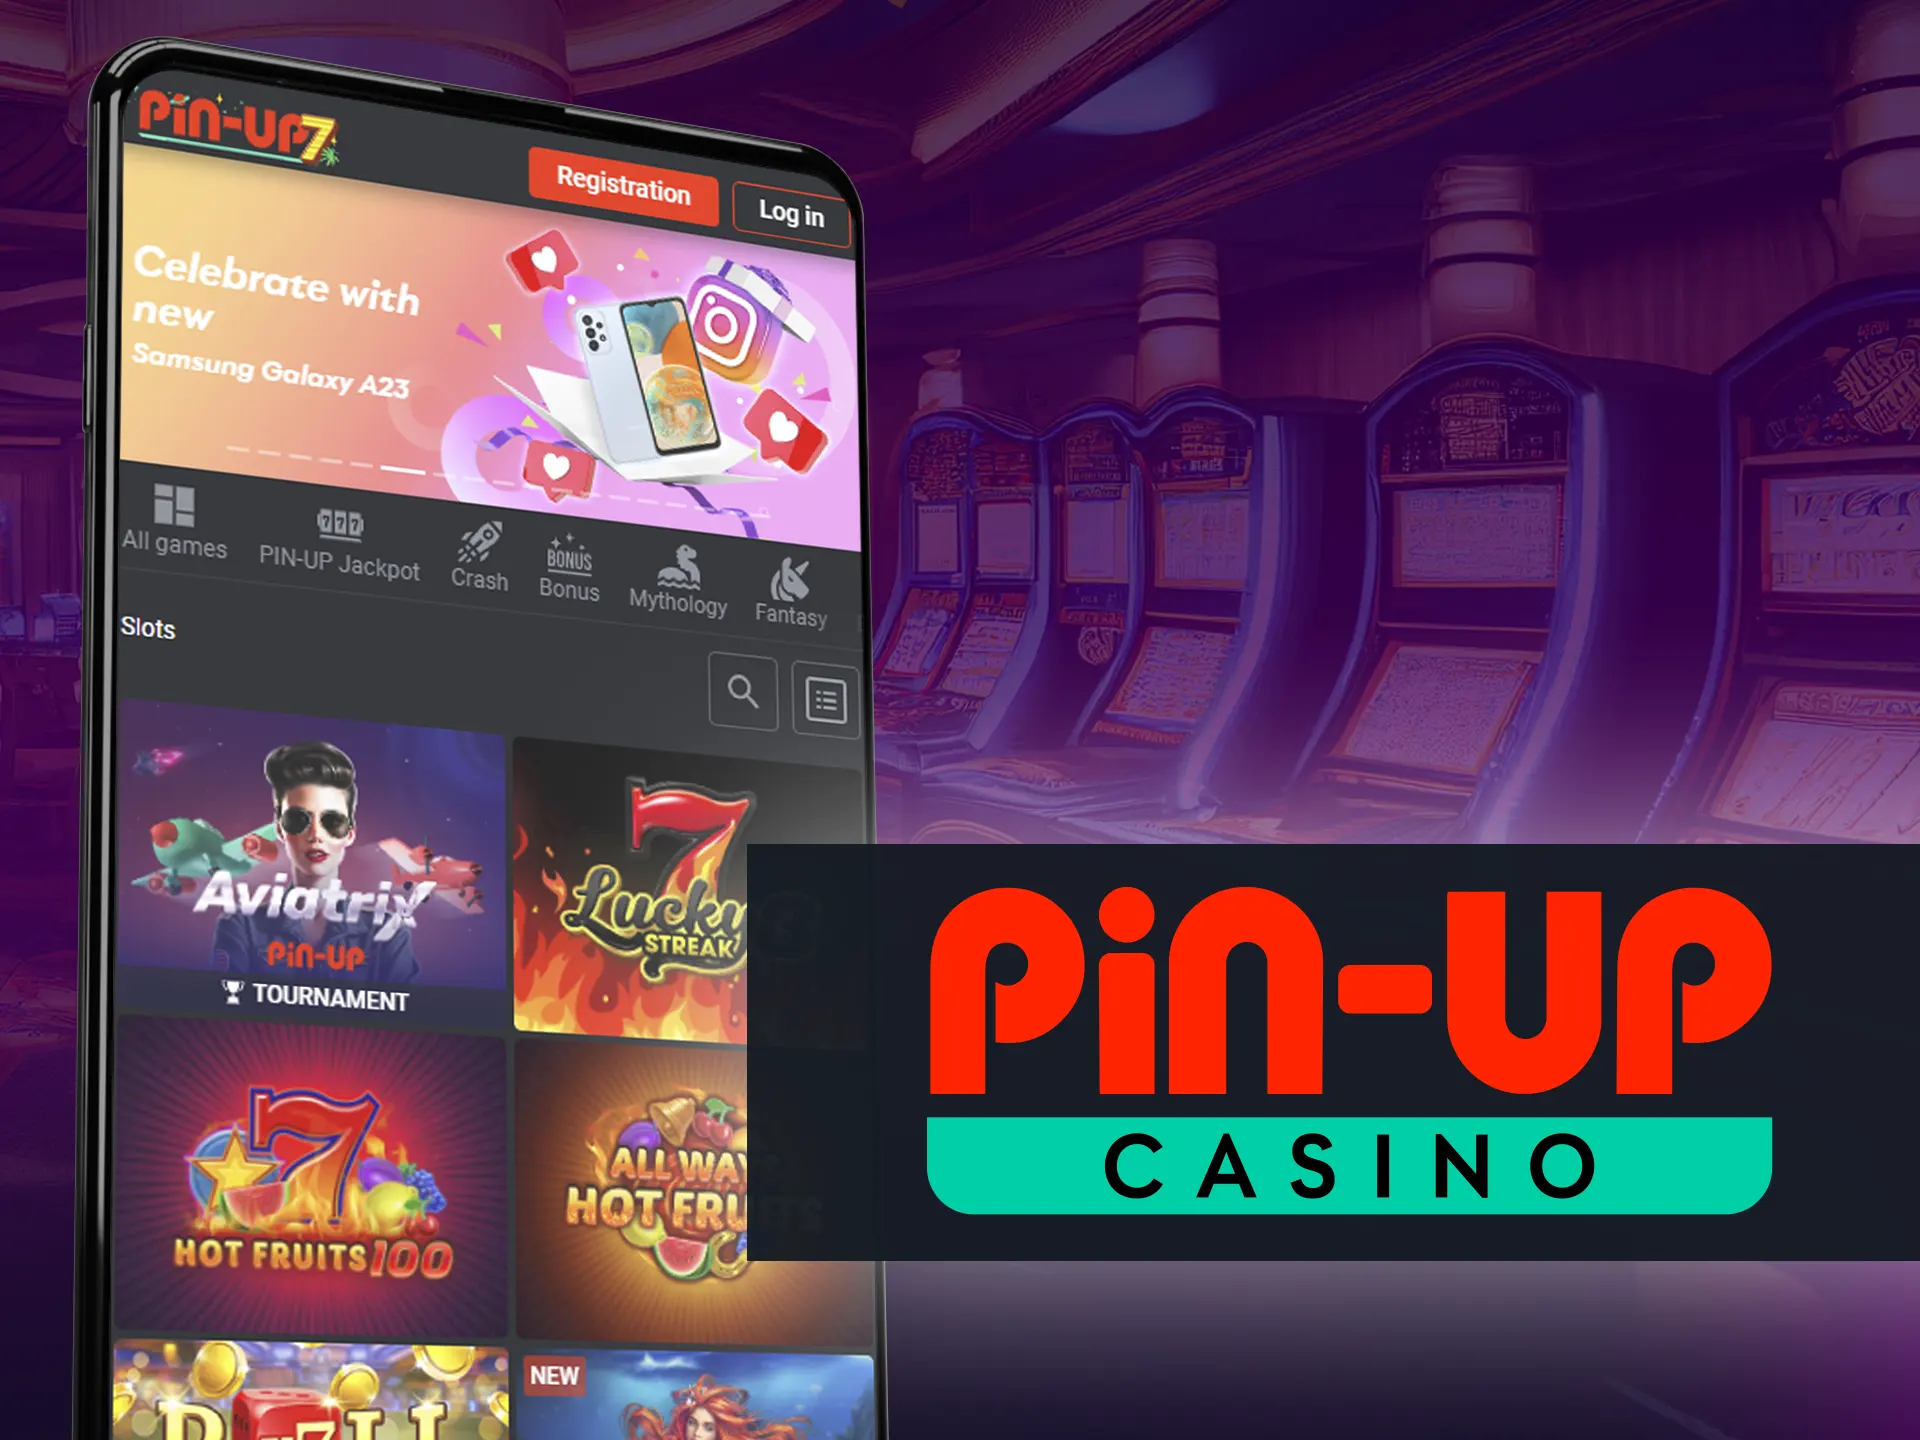 Try your luck at Pin-Up app Casino slots.